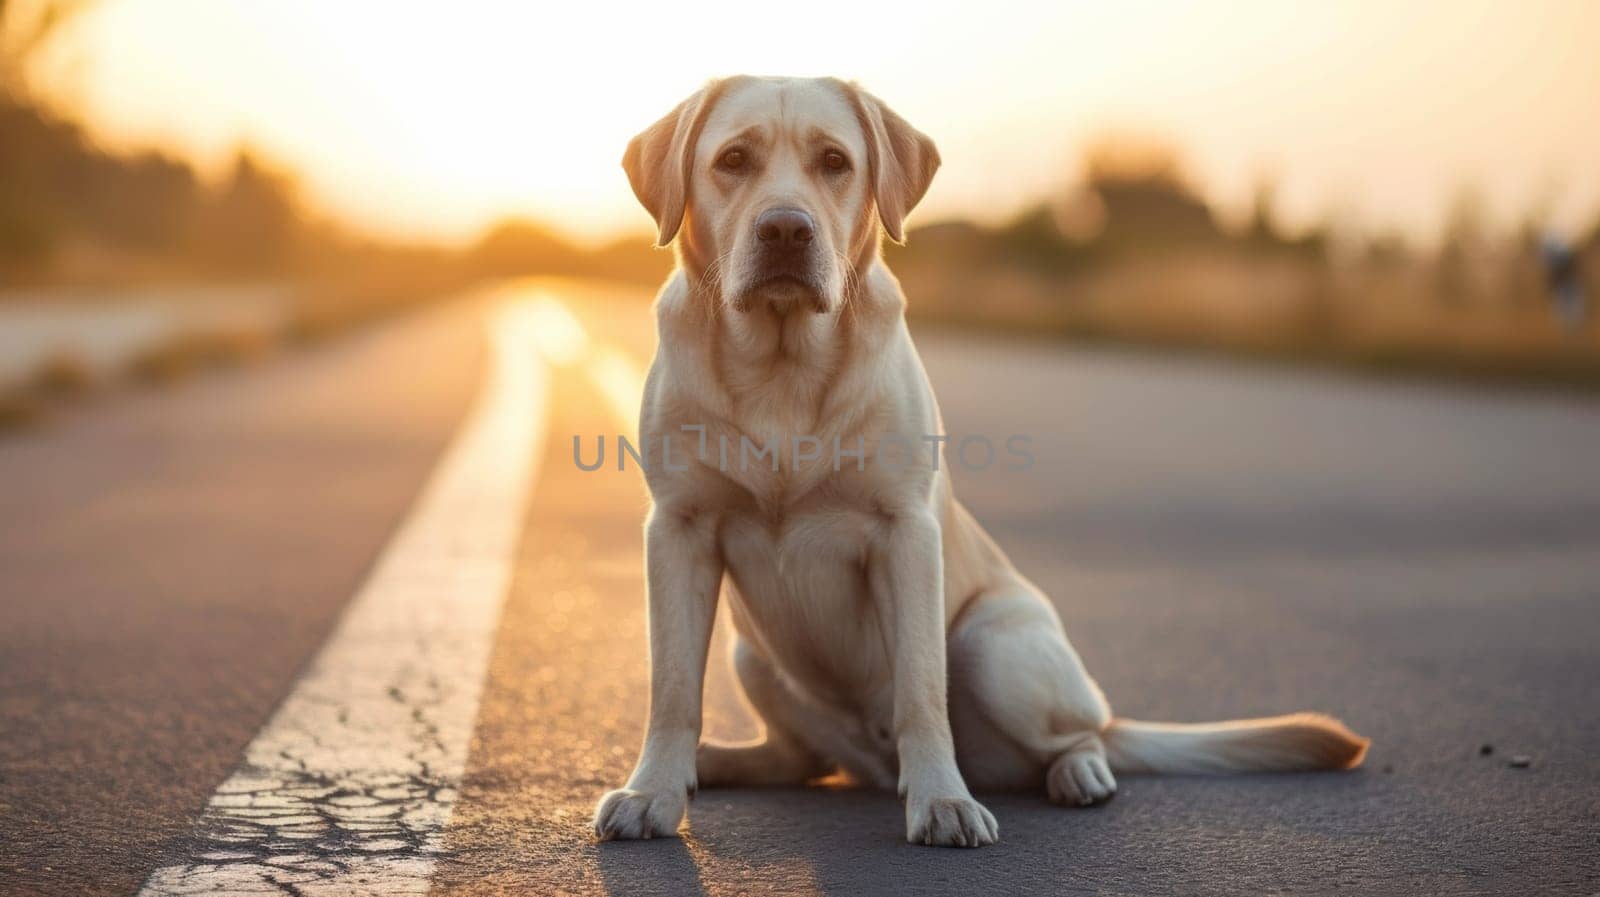 A dog sitting on the side of a road at sunset